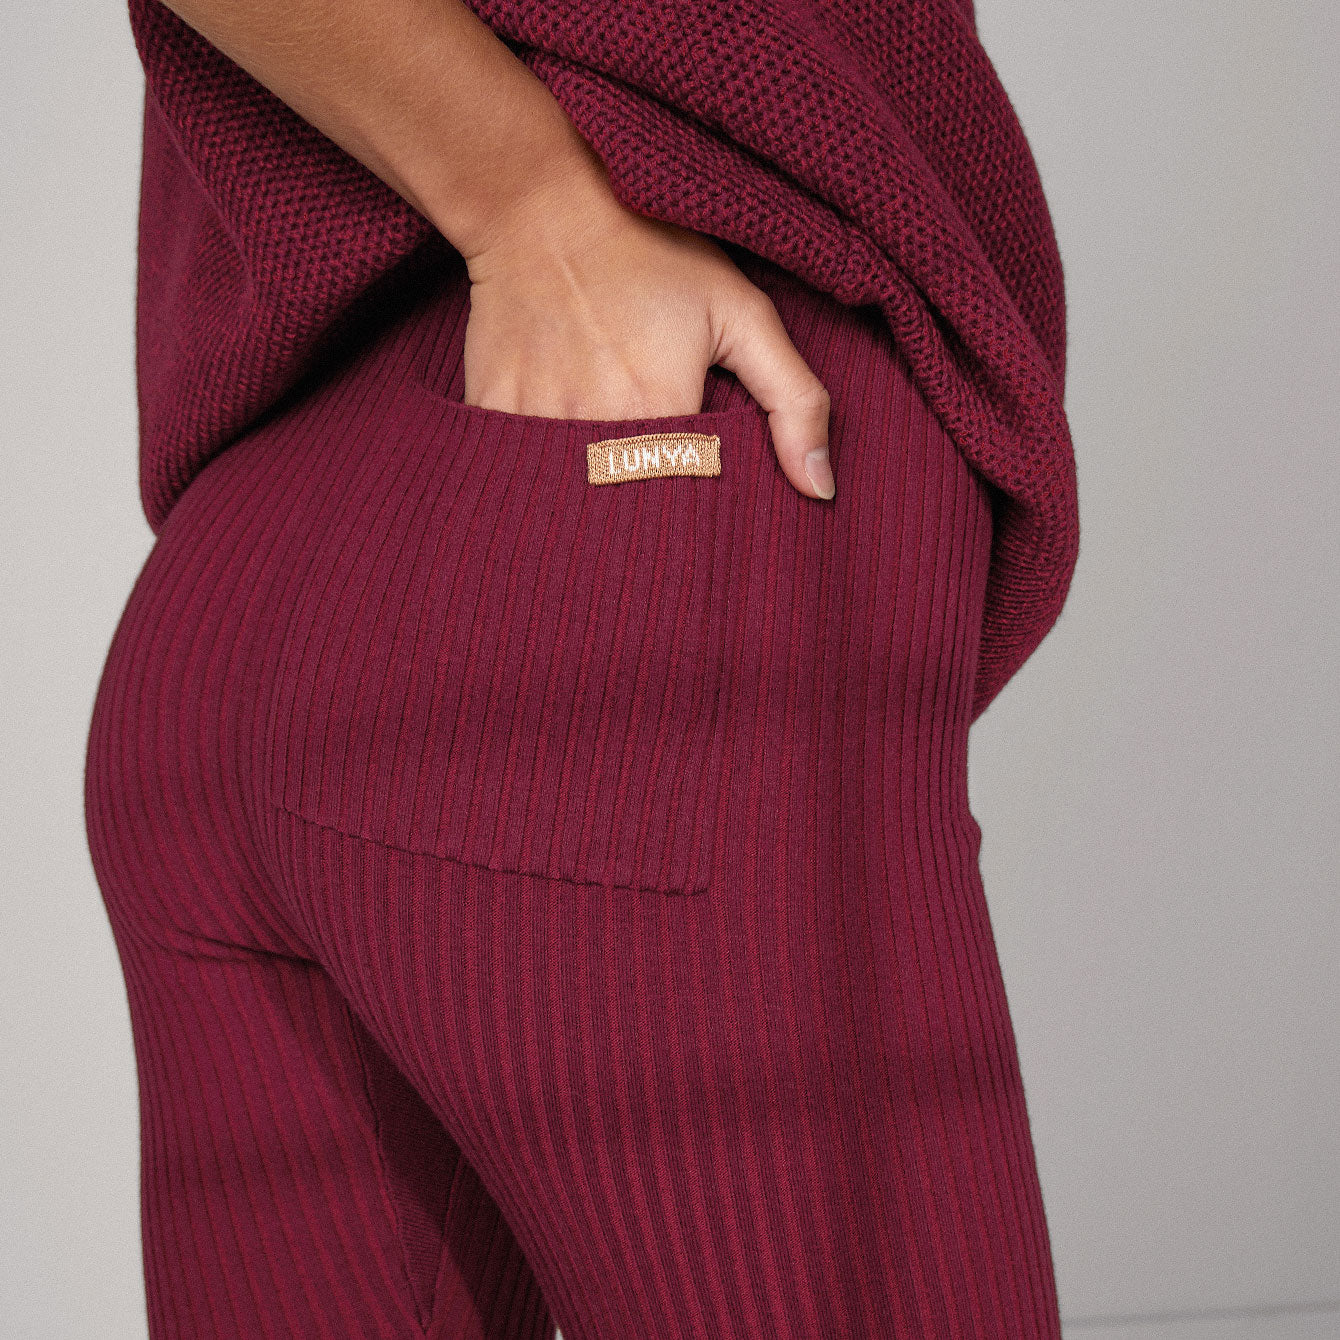 Buy Maroon Knitted Cotton Blend Yoga Pants (Yoga Pants) for INR599